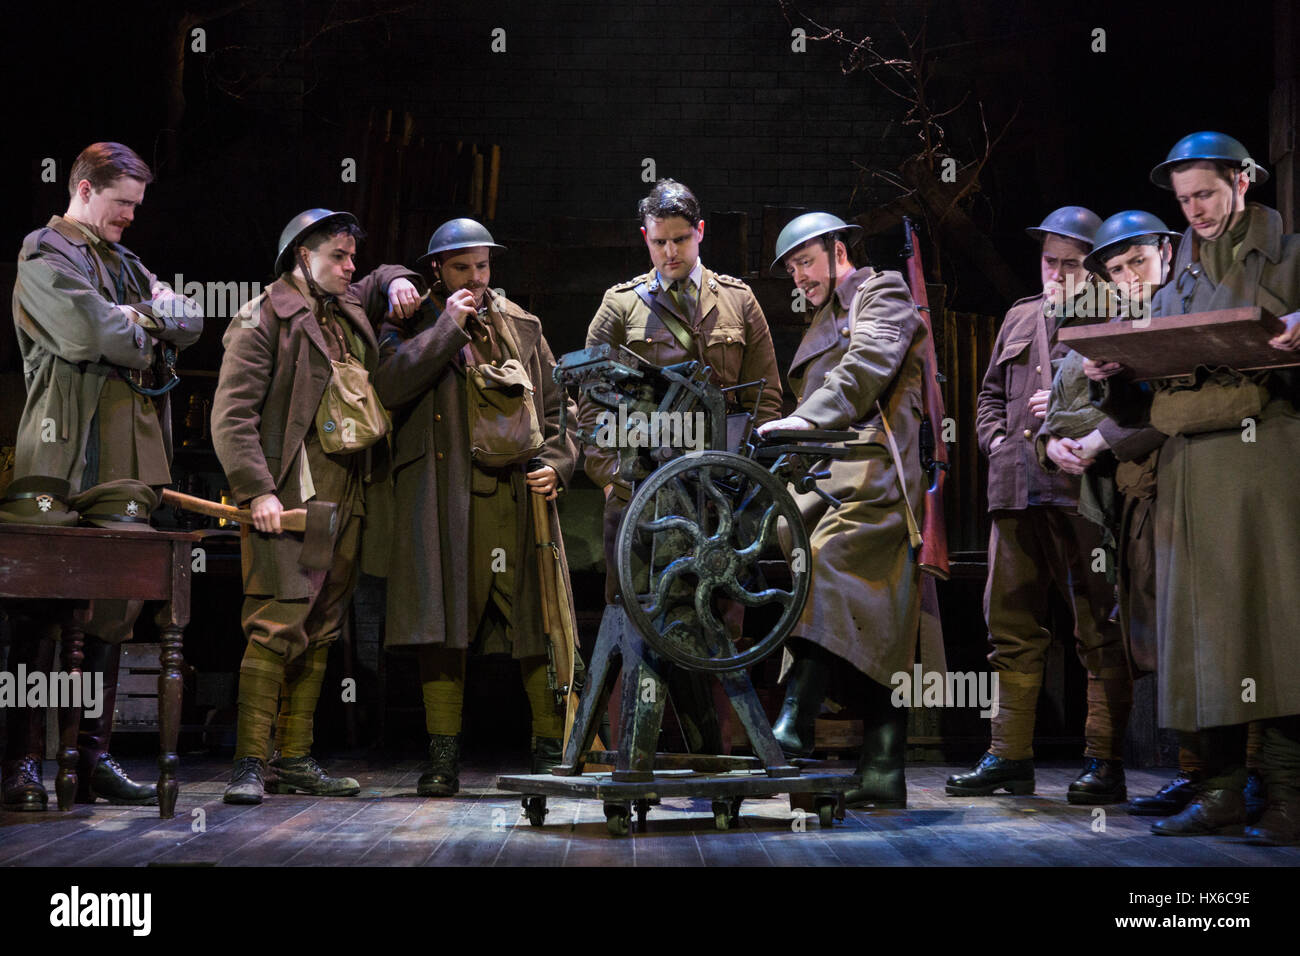 London, UK. 24 March 2017. Ian Hislop and Nick Newman’s The Wipers Times tells the true and extraordinary story of the satirical newspaper created in the mud and mayhem of the Somme. Following a sell-out tour, The Wipers Times transfers to the Arts Theatre from 21 March to 13 May 2017. Cast: Kevin Brewer (Henderson), Clio Davies (Nurse / Madame Fifi / Lady Somersby), Sam Ducane (Lieutenant Colonel Howfield), James Dutton (Captain Roberts), George Kemp (Lieutenant Pearson), Peter Losasso (Dodd), Ross McLaren (Smith/Bobbing Bobby/Chaplain), Jake Morgan (Barnes), Dan Tetsell (Deputy Editor / Gene Stock Photo